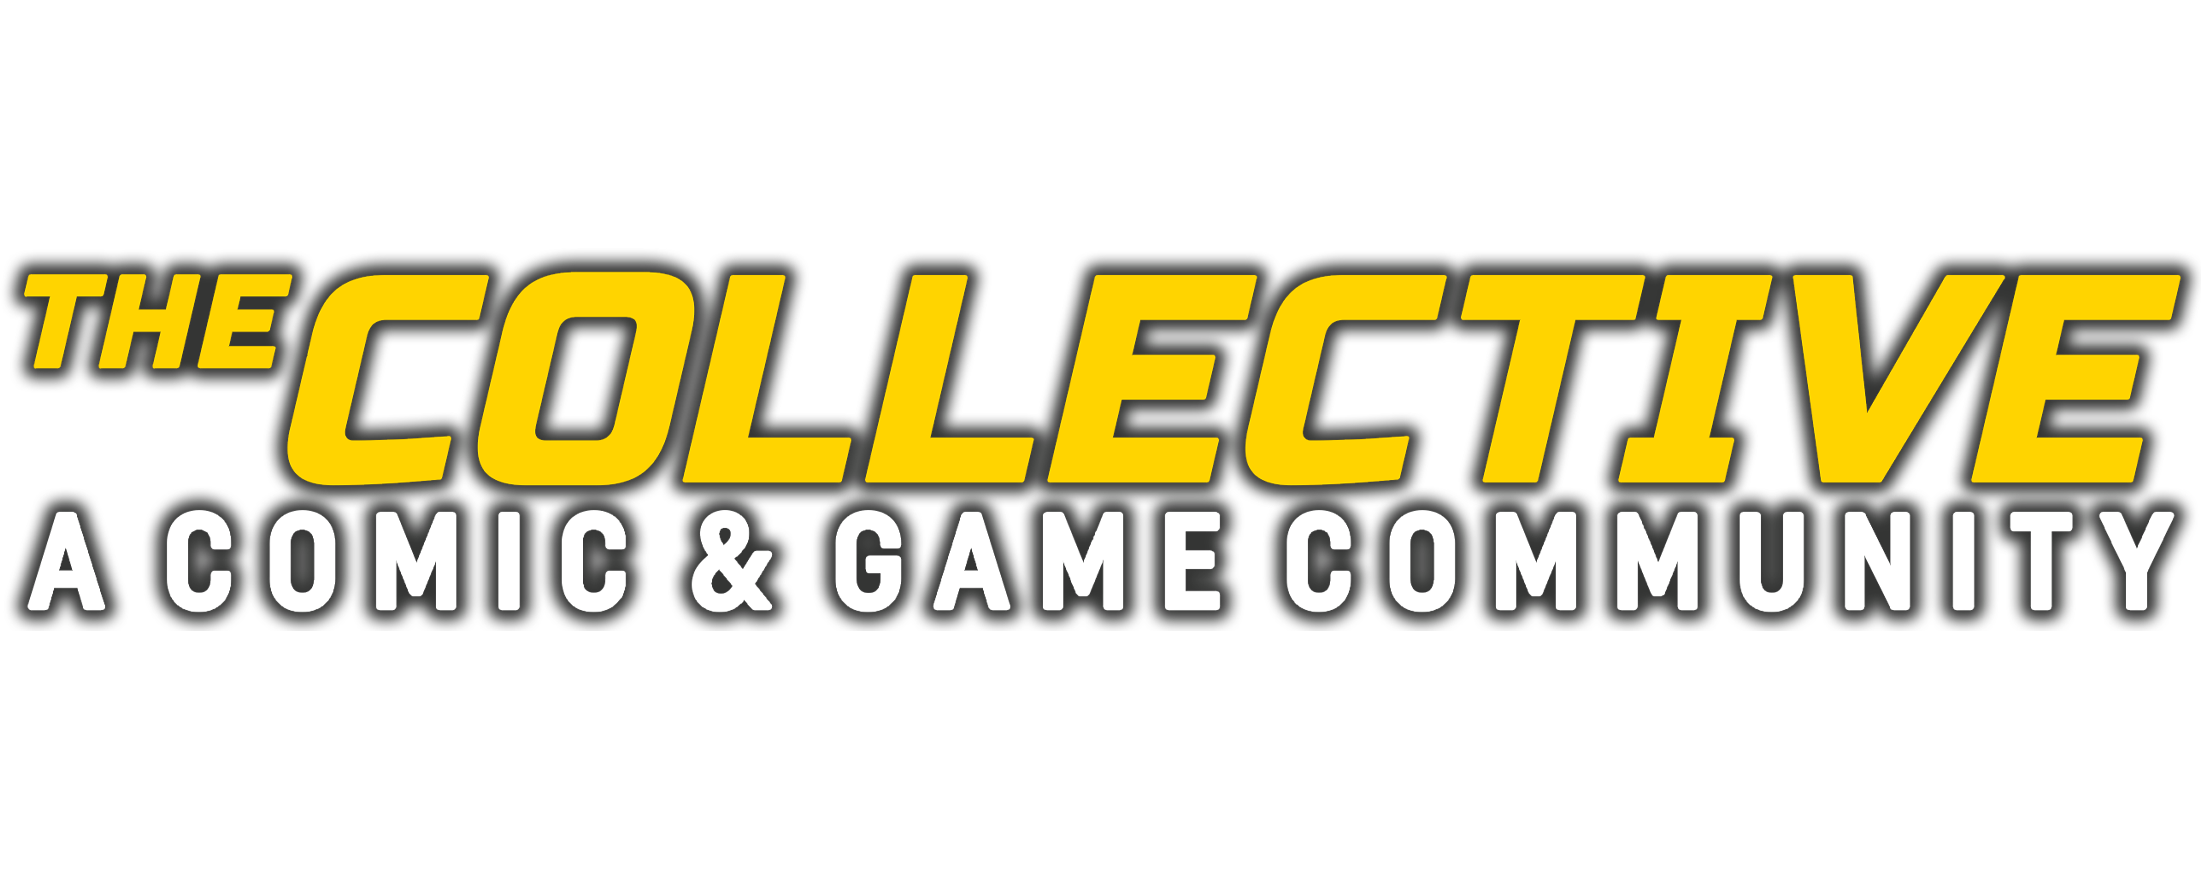 The Collective: A Comic & Game Community